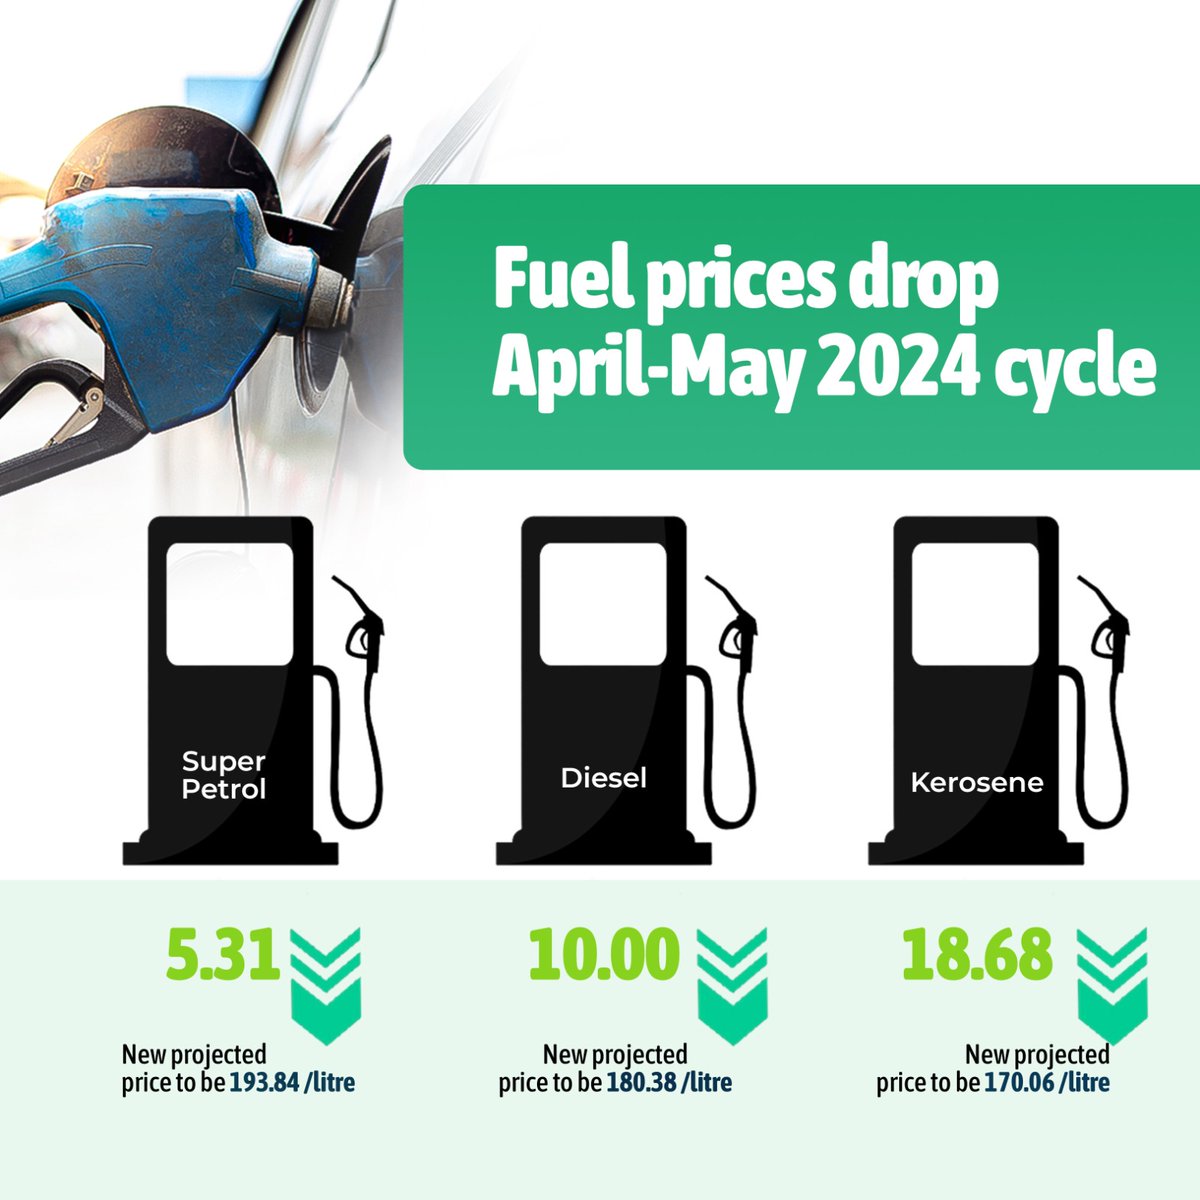 Fuel prices going down;

SUPER Petrol price falls to Sh193.84, down by Sh5.31 in the latest EPRA review; Diesel to retail at Sh180.38, Kerosene Sh170.06 until May 14.

#trusttheprocess2024